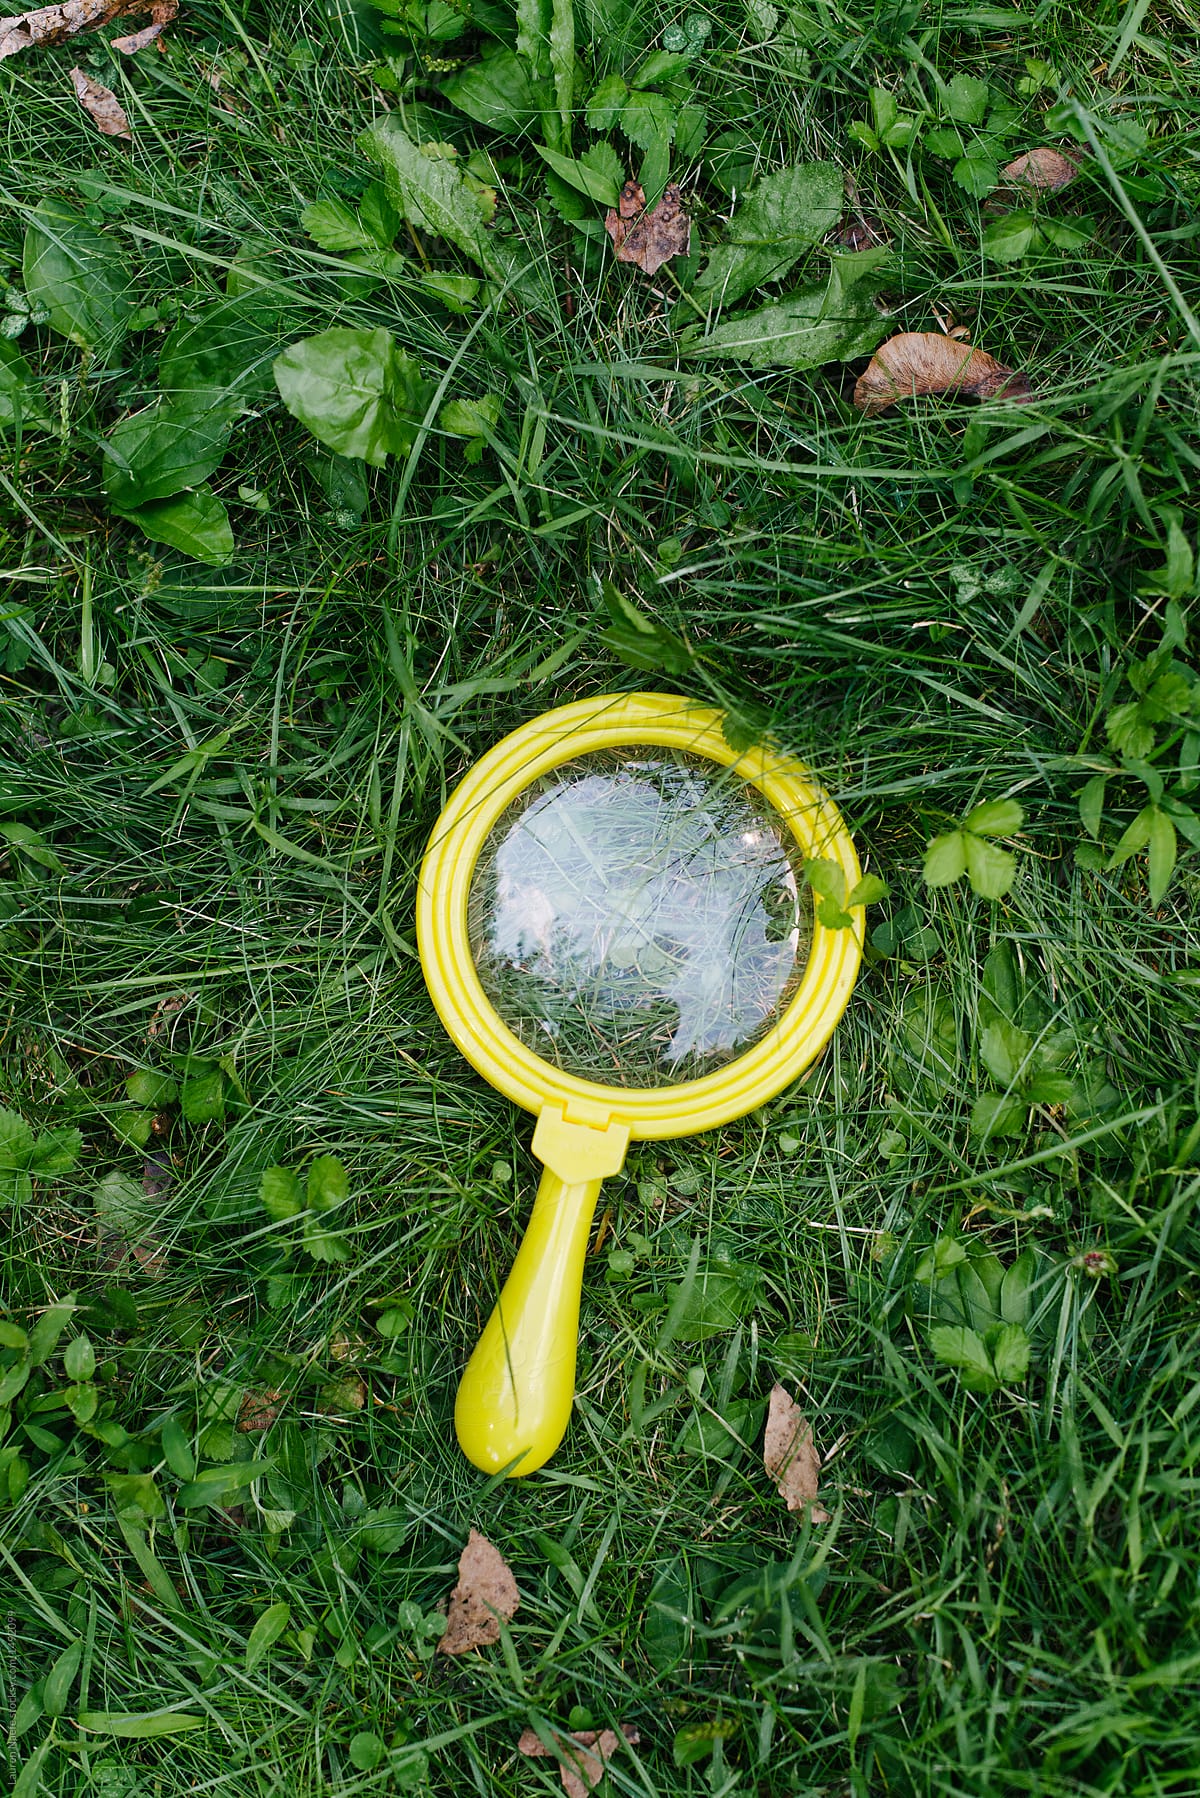 Magnifying glass toy in the grass